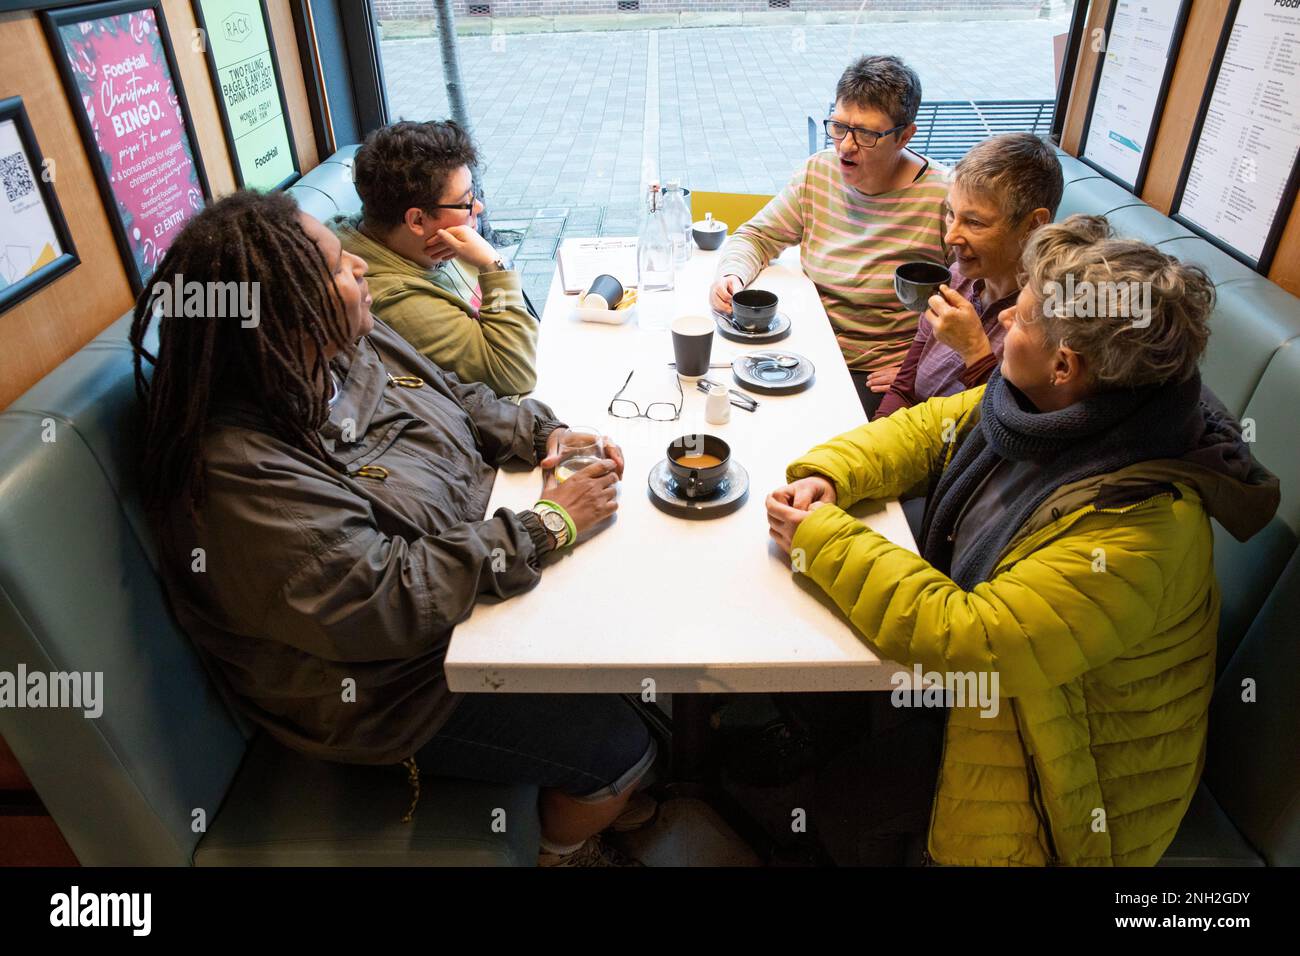 Group of women friends seated at a table and meeting up for coffee. Manchester. United Kingdom. Stock Photo